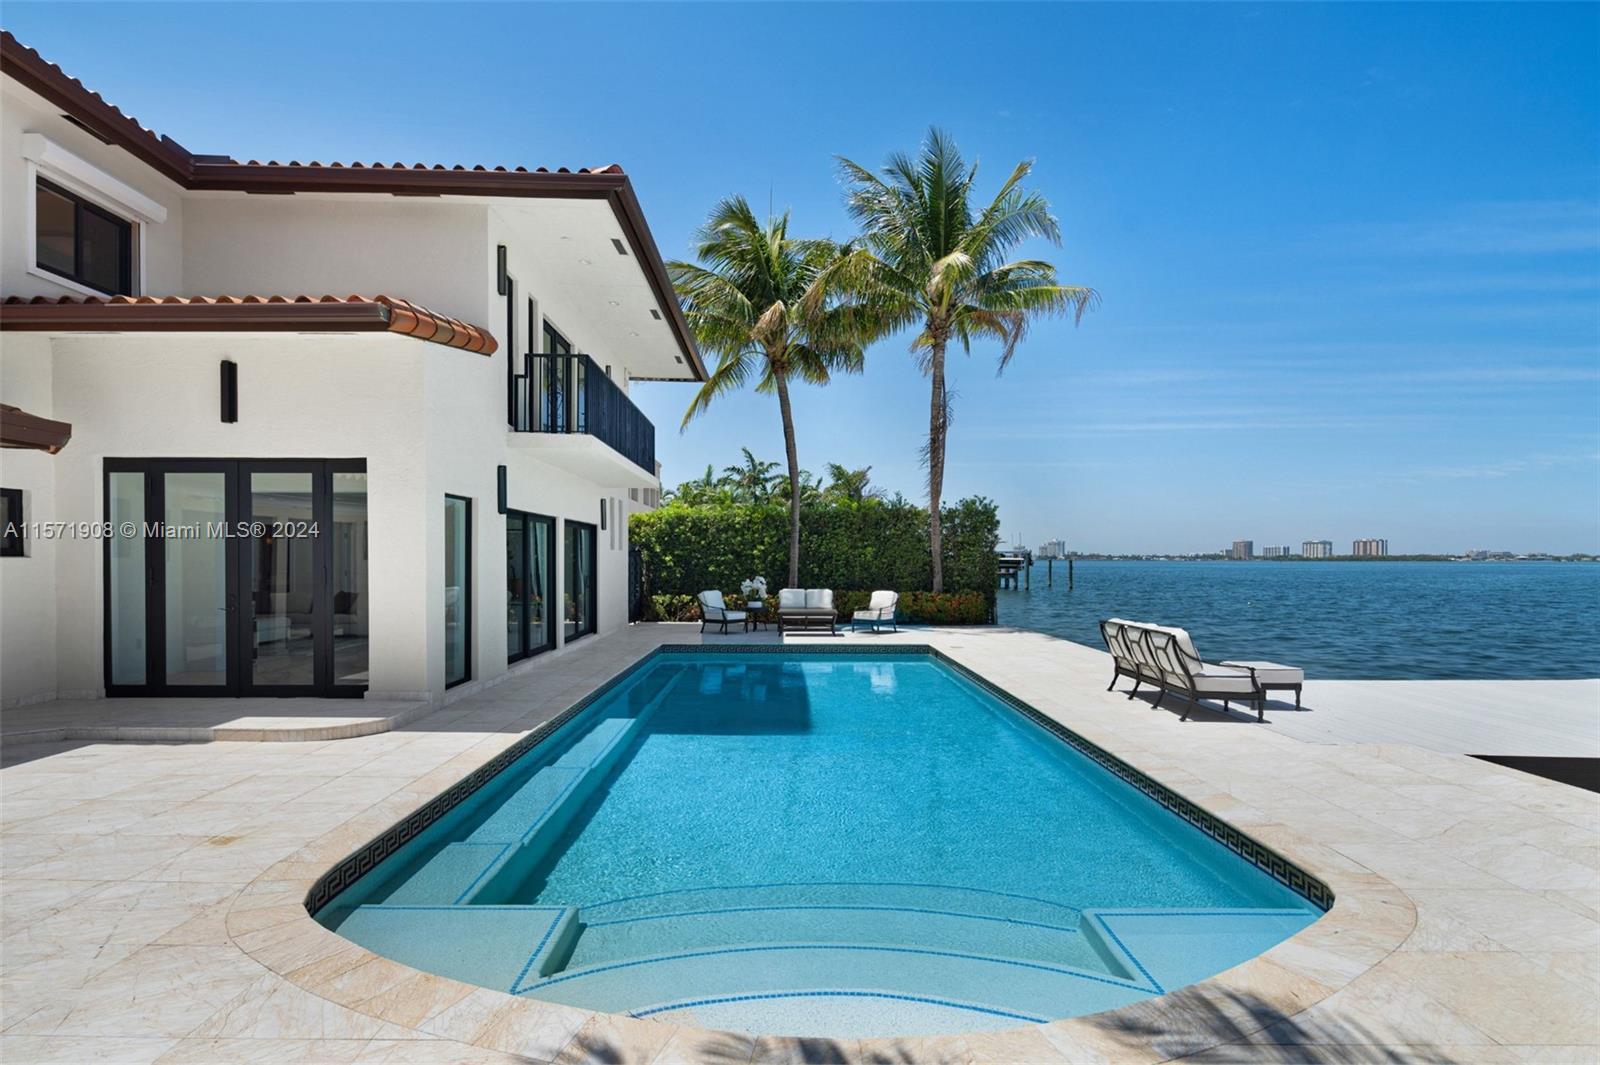 Step Inside With Me! This Mediterranean abode in the beloved Biscayne Point offers open bay views in